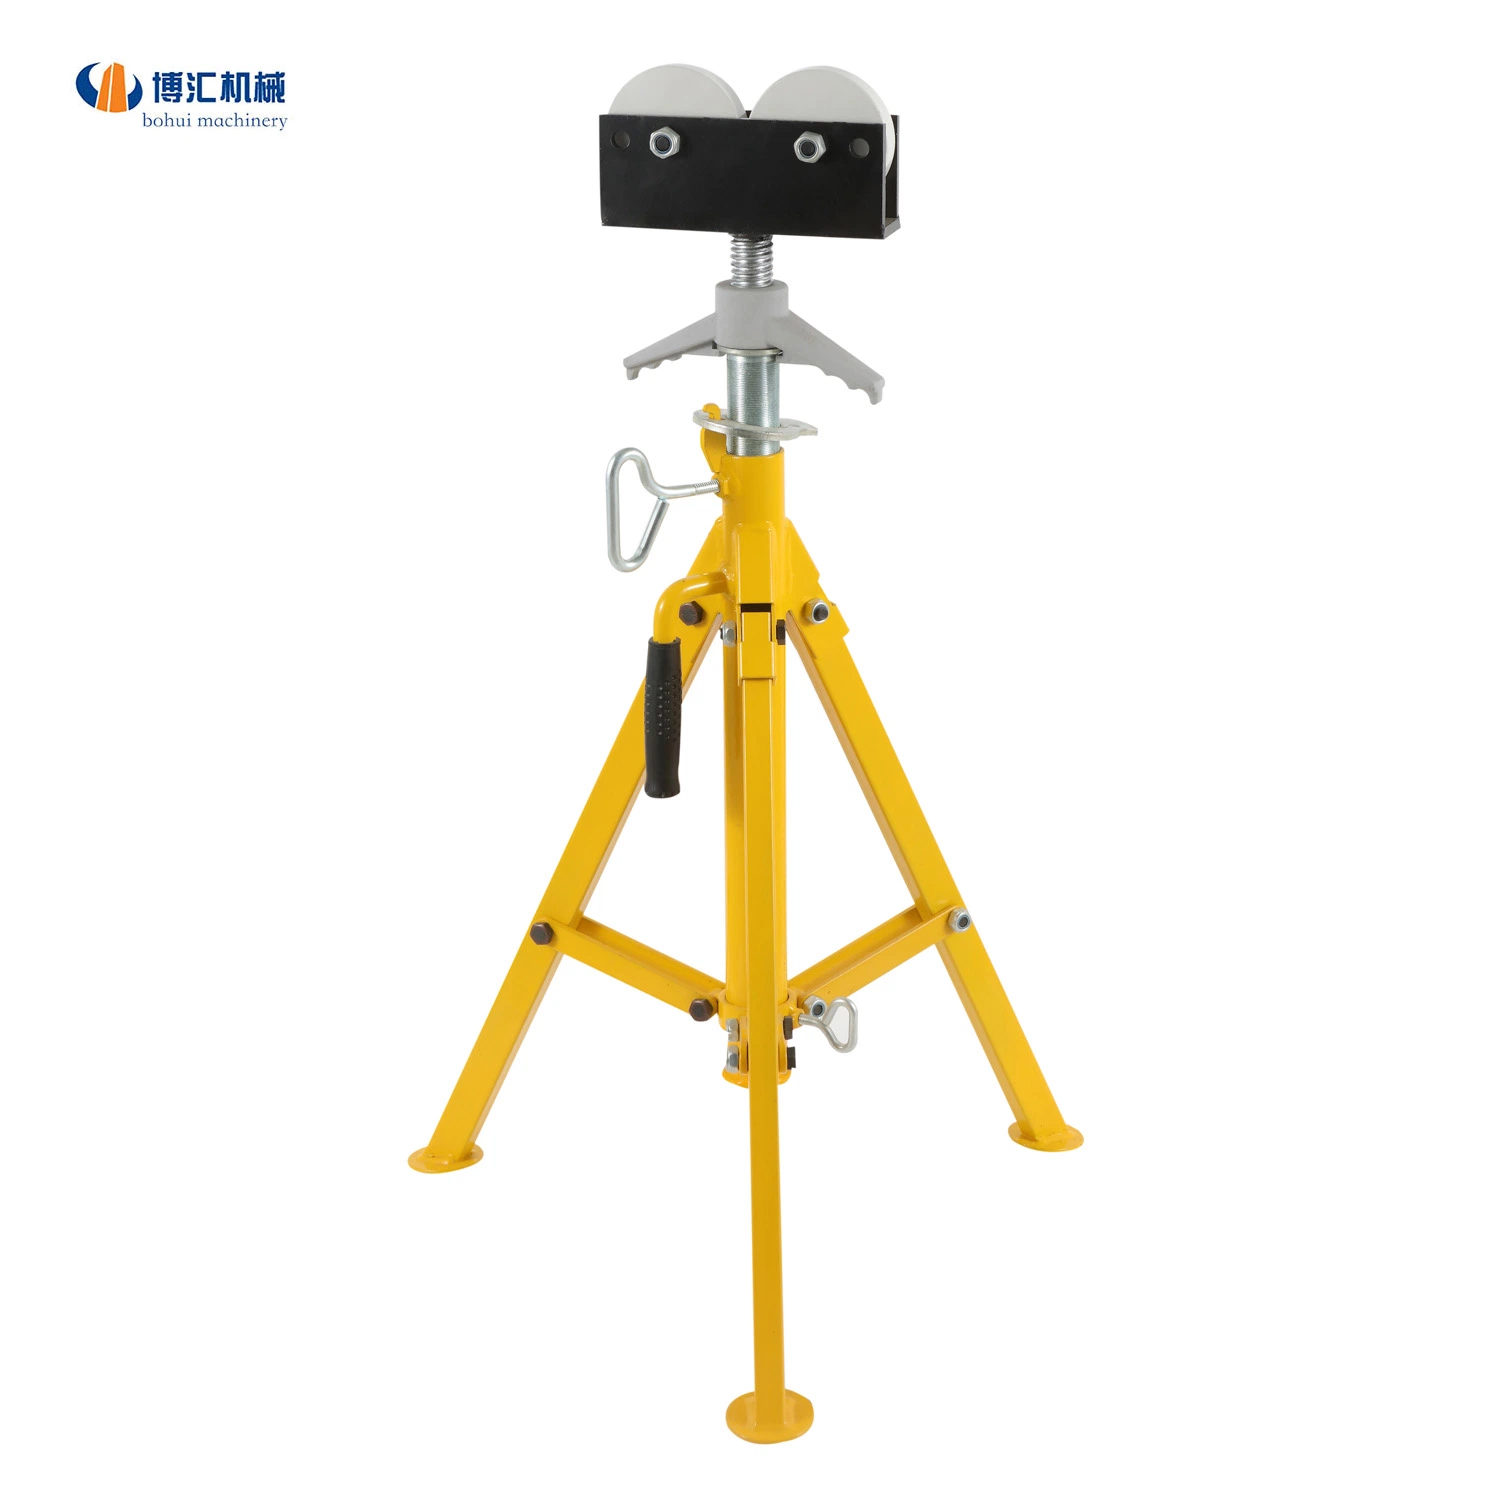 Stainless Steel Body Pipe Stand Pipe Support with Roller Head